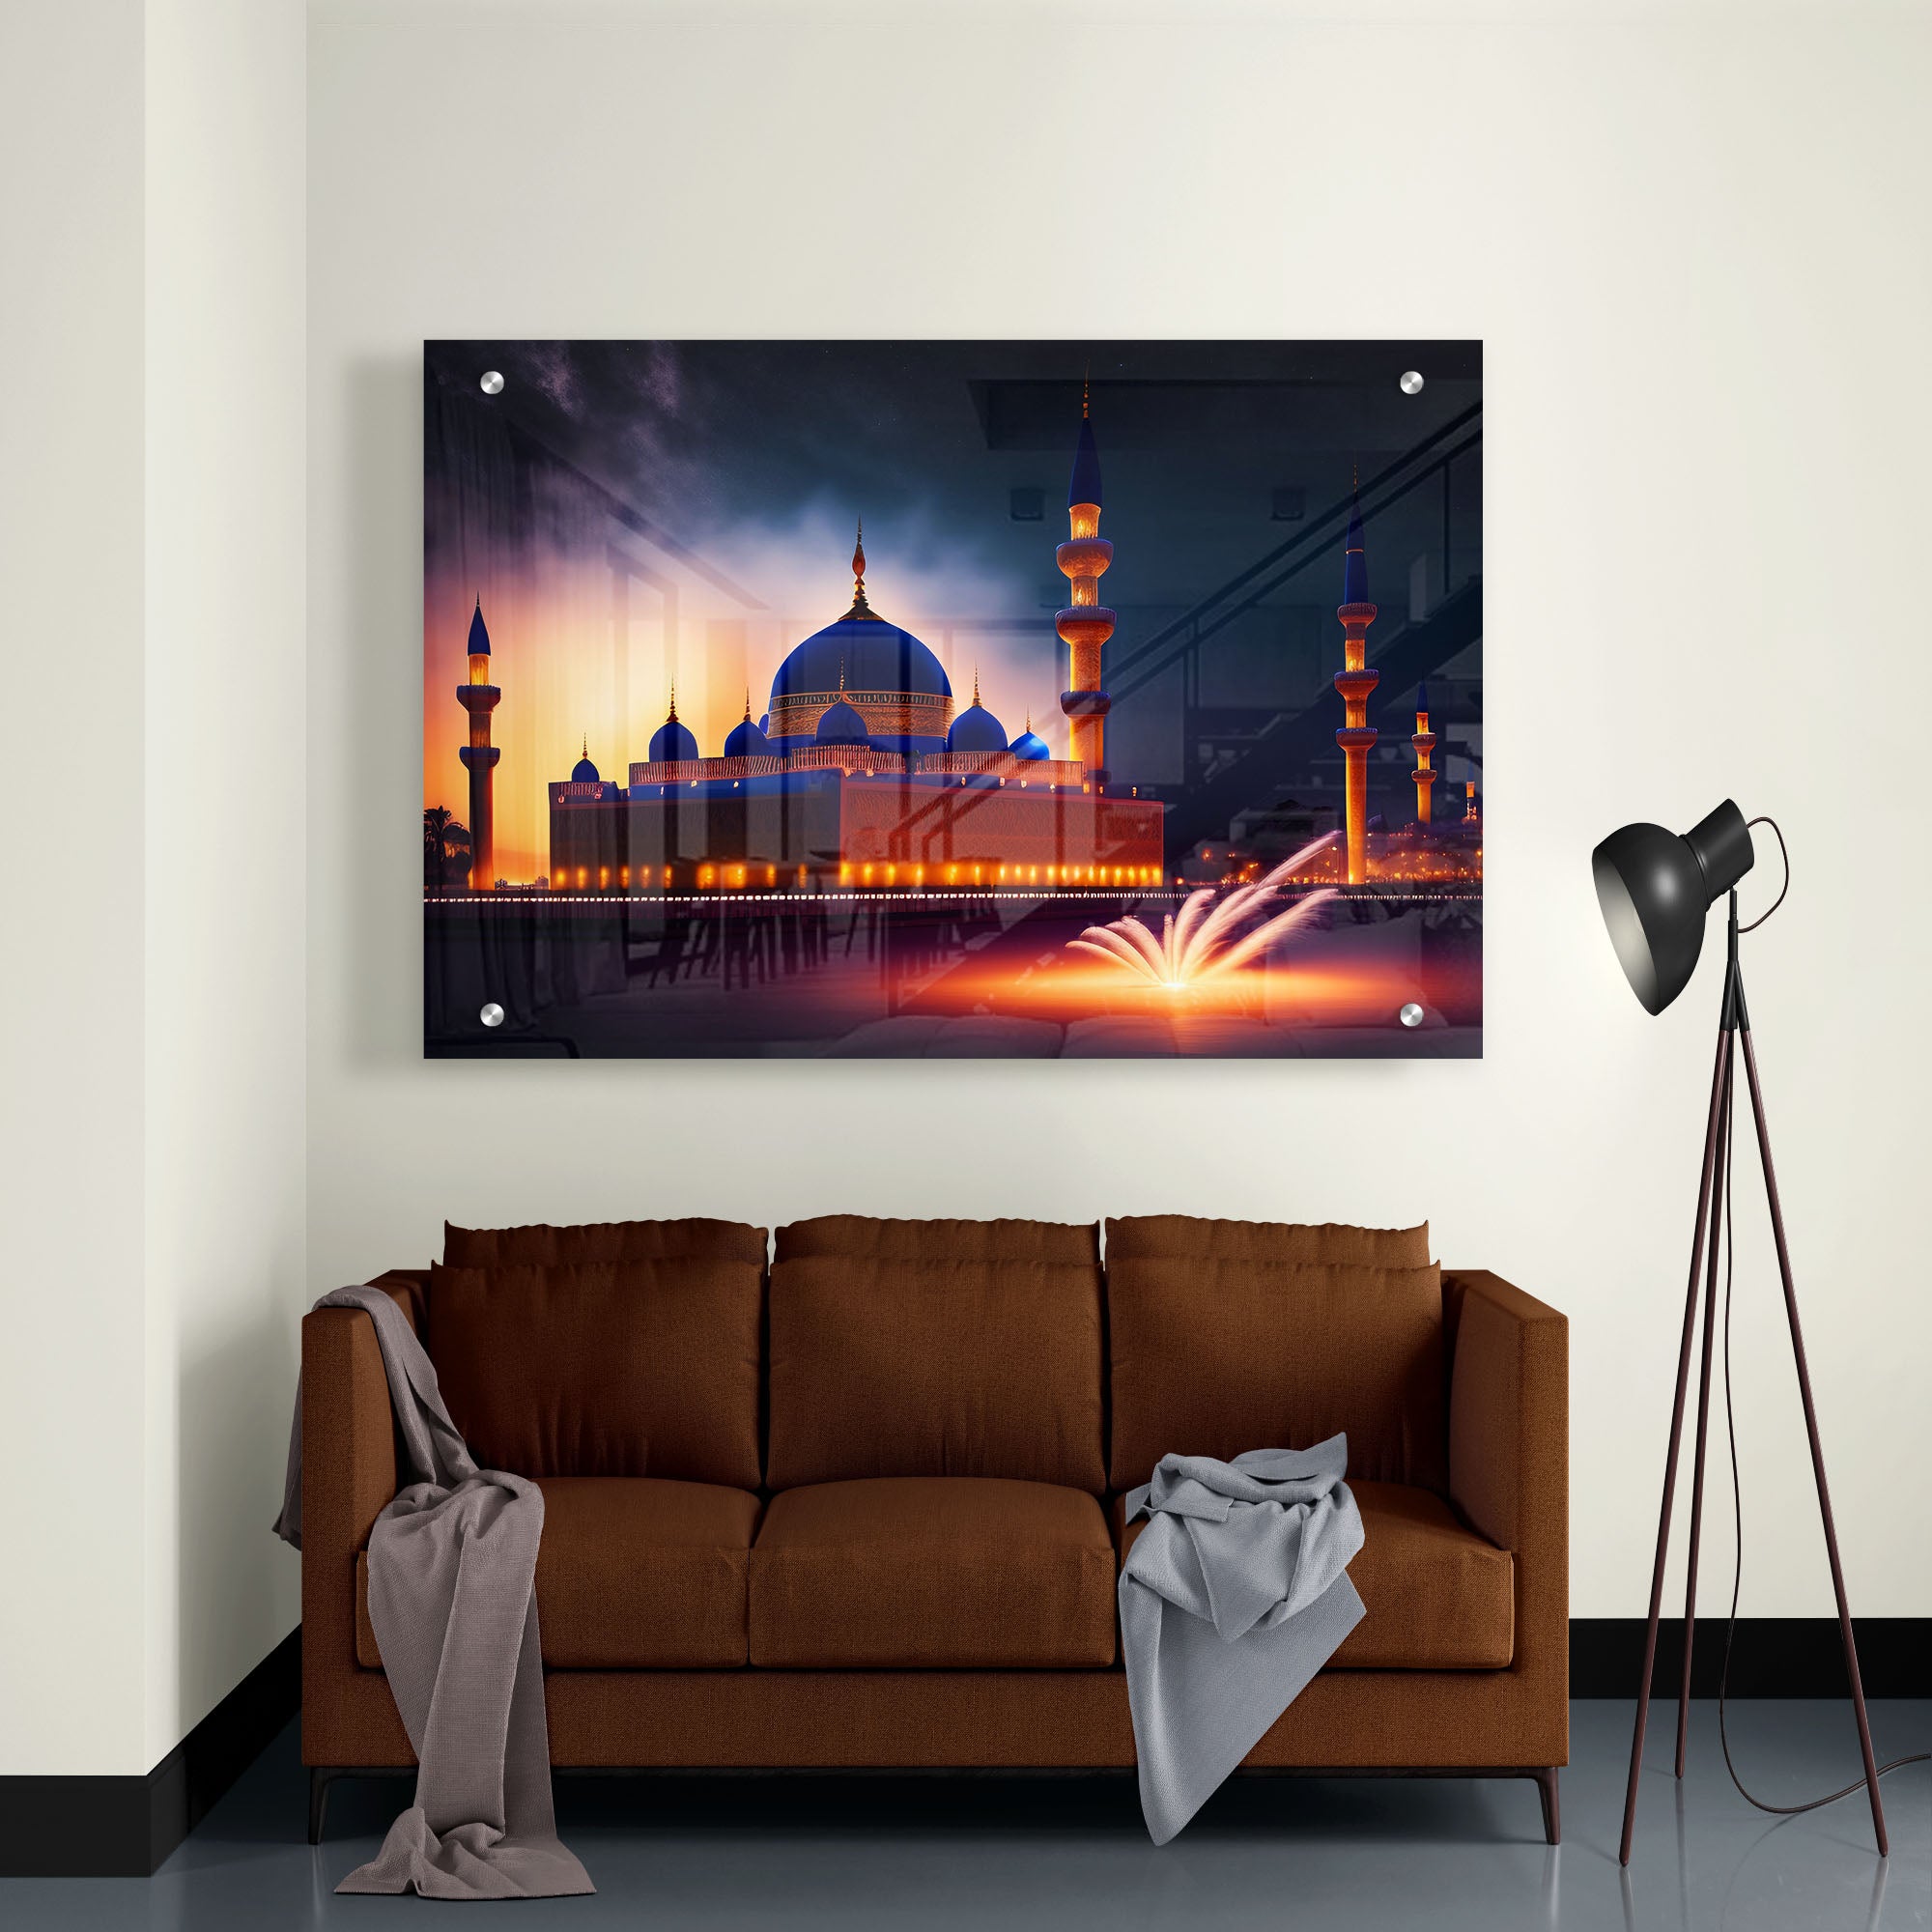 Islamic Attractive Mosque Acrylic Wall Painting